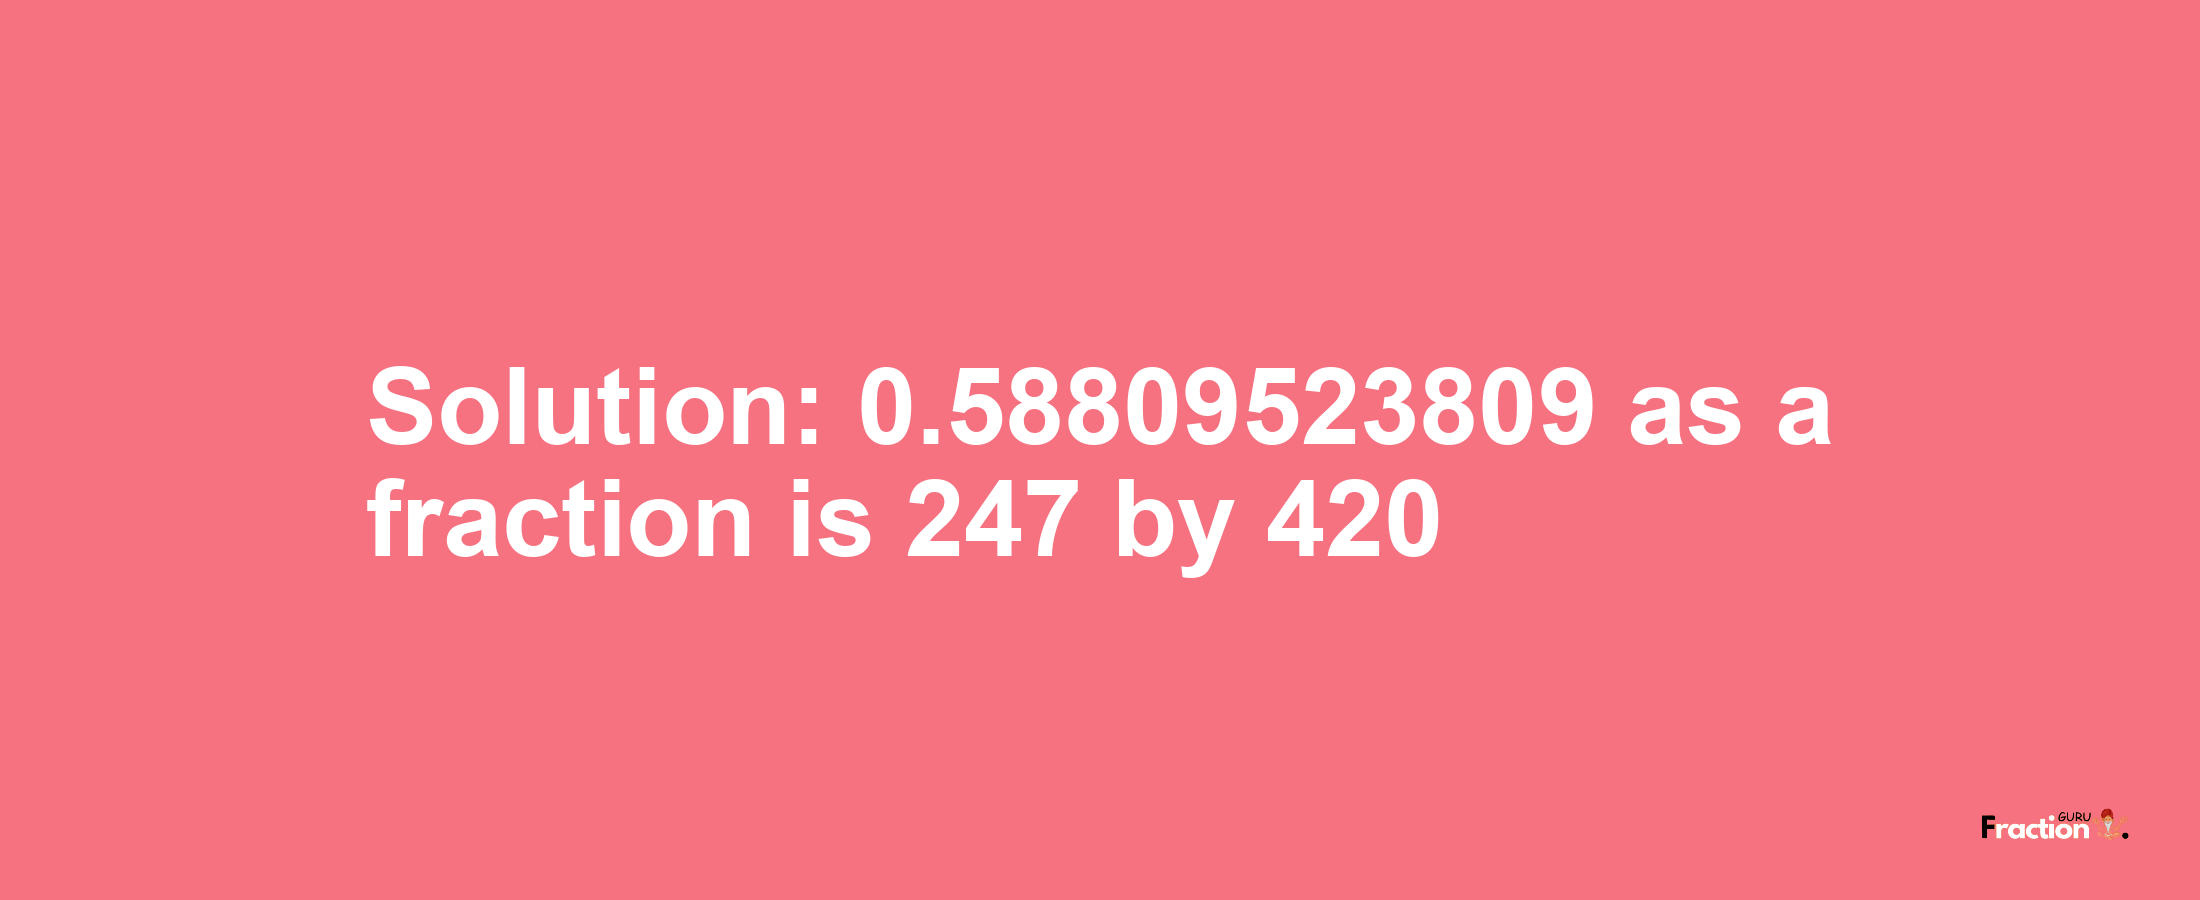 Solution:0.58809523809 as a fraction is 247/420